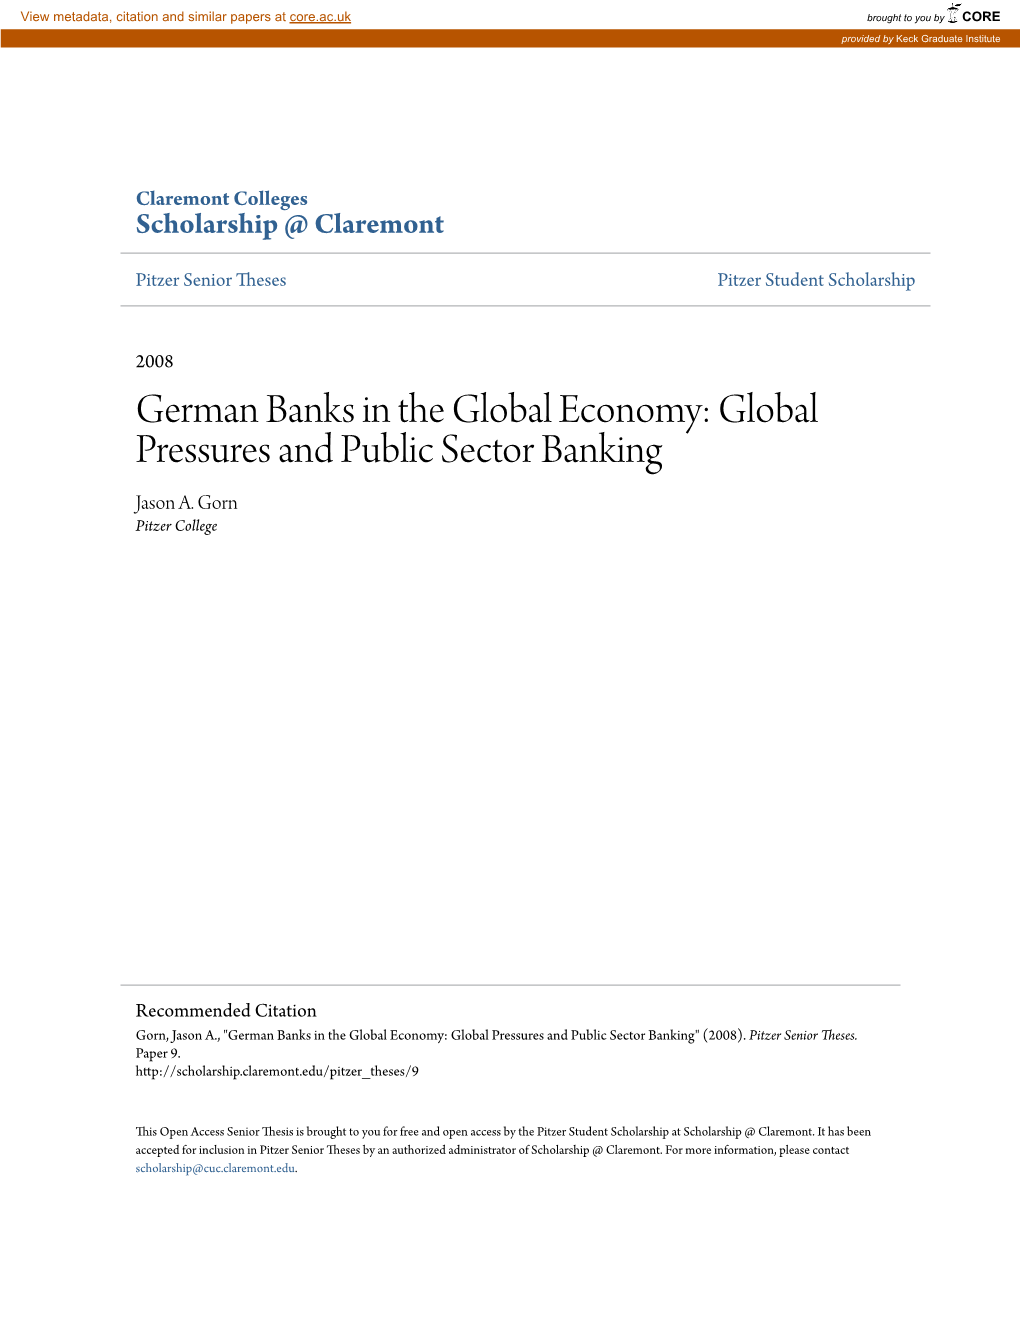 Global Pressures and Public Sector Banking Jason A